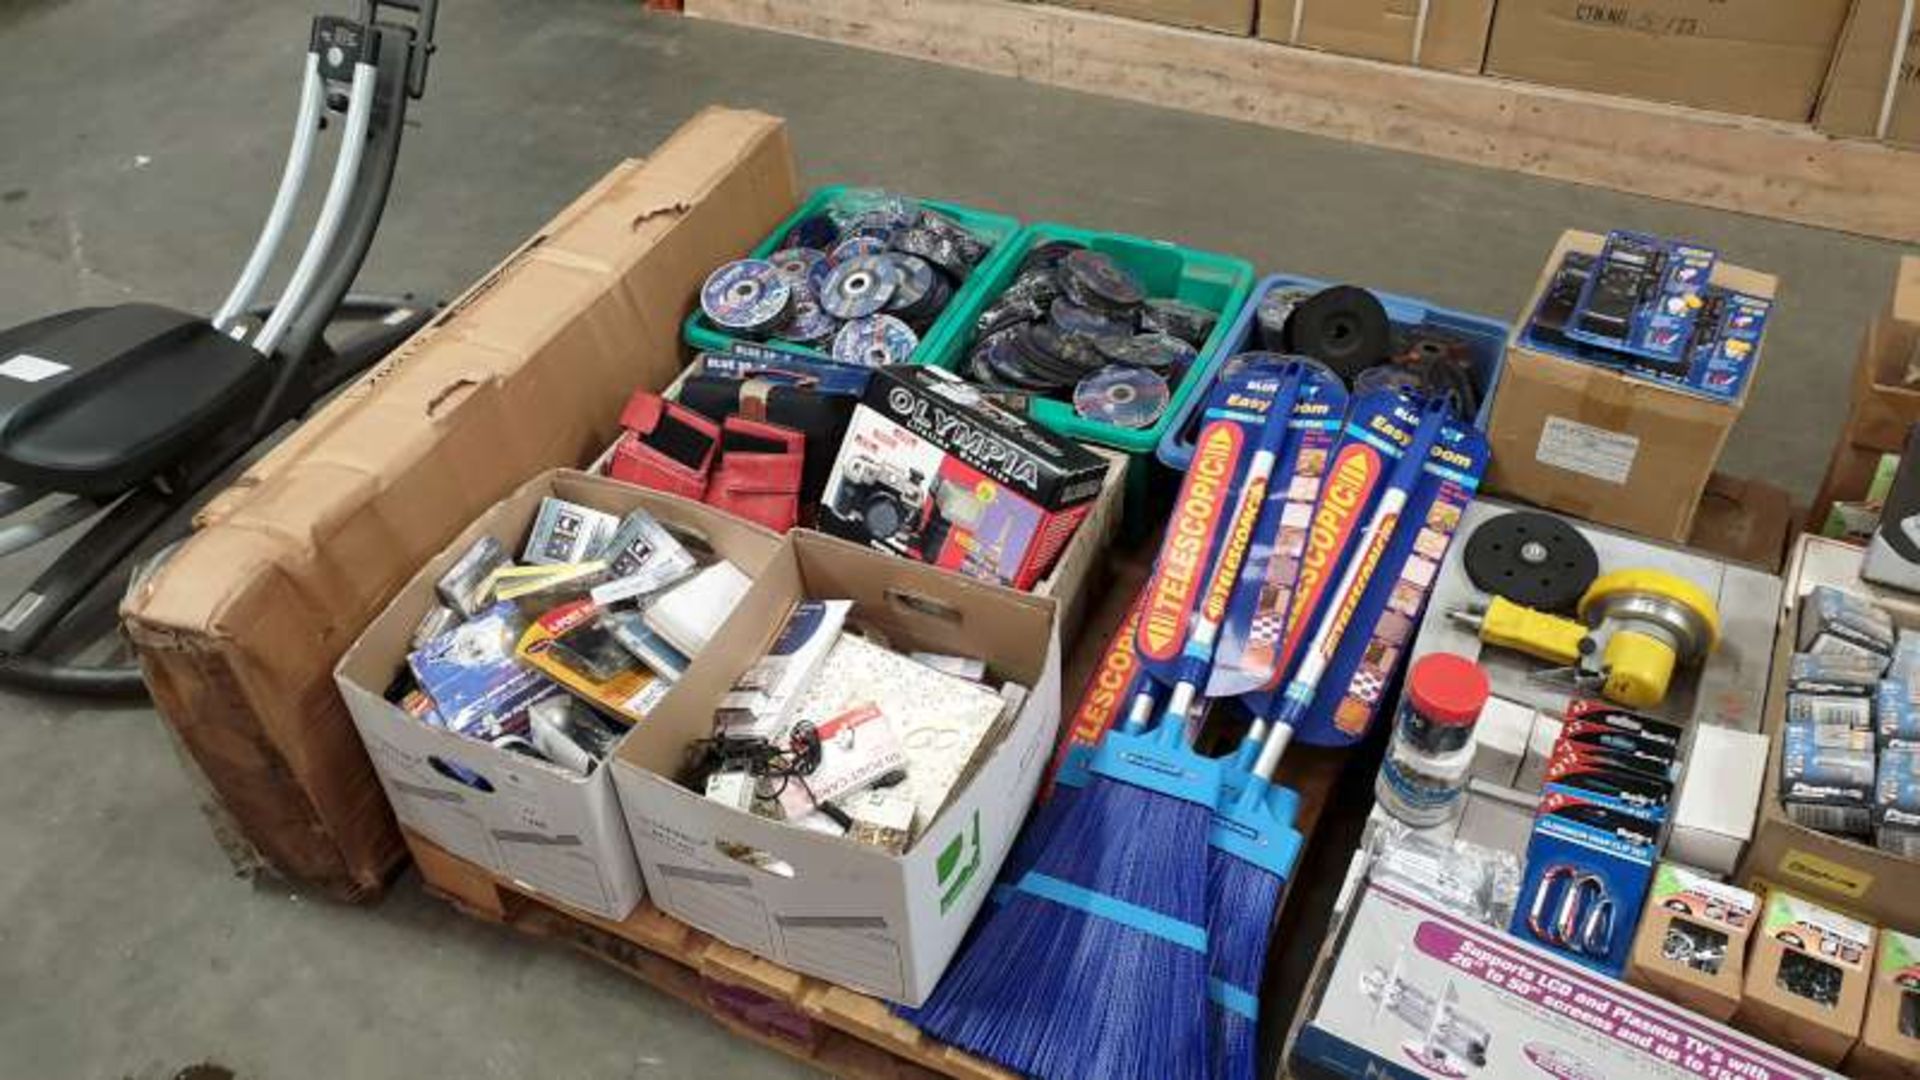 PALLET CONTAINING EASY BROOMS, GRINDING DISCS, PVC PIPE CUTTERS, 4 PORT HUB, DIGITAL CAMERAS,